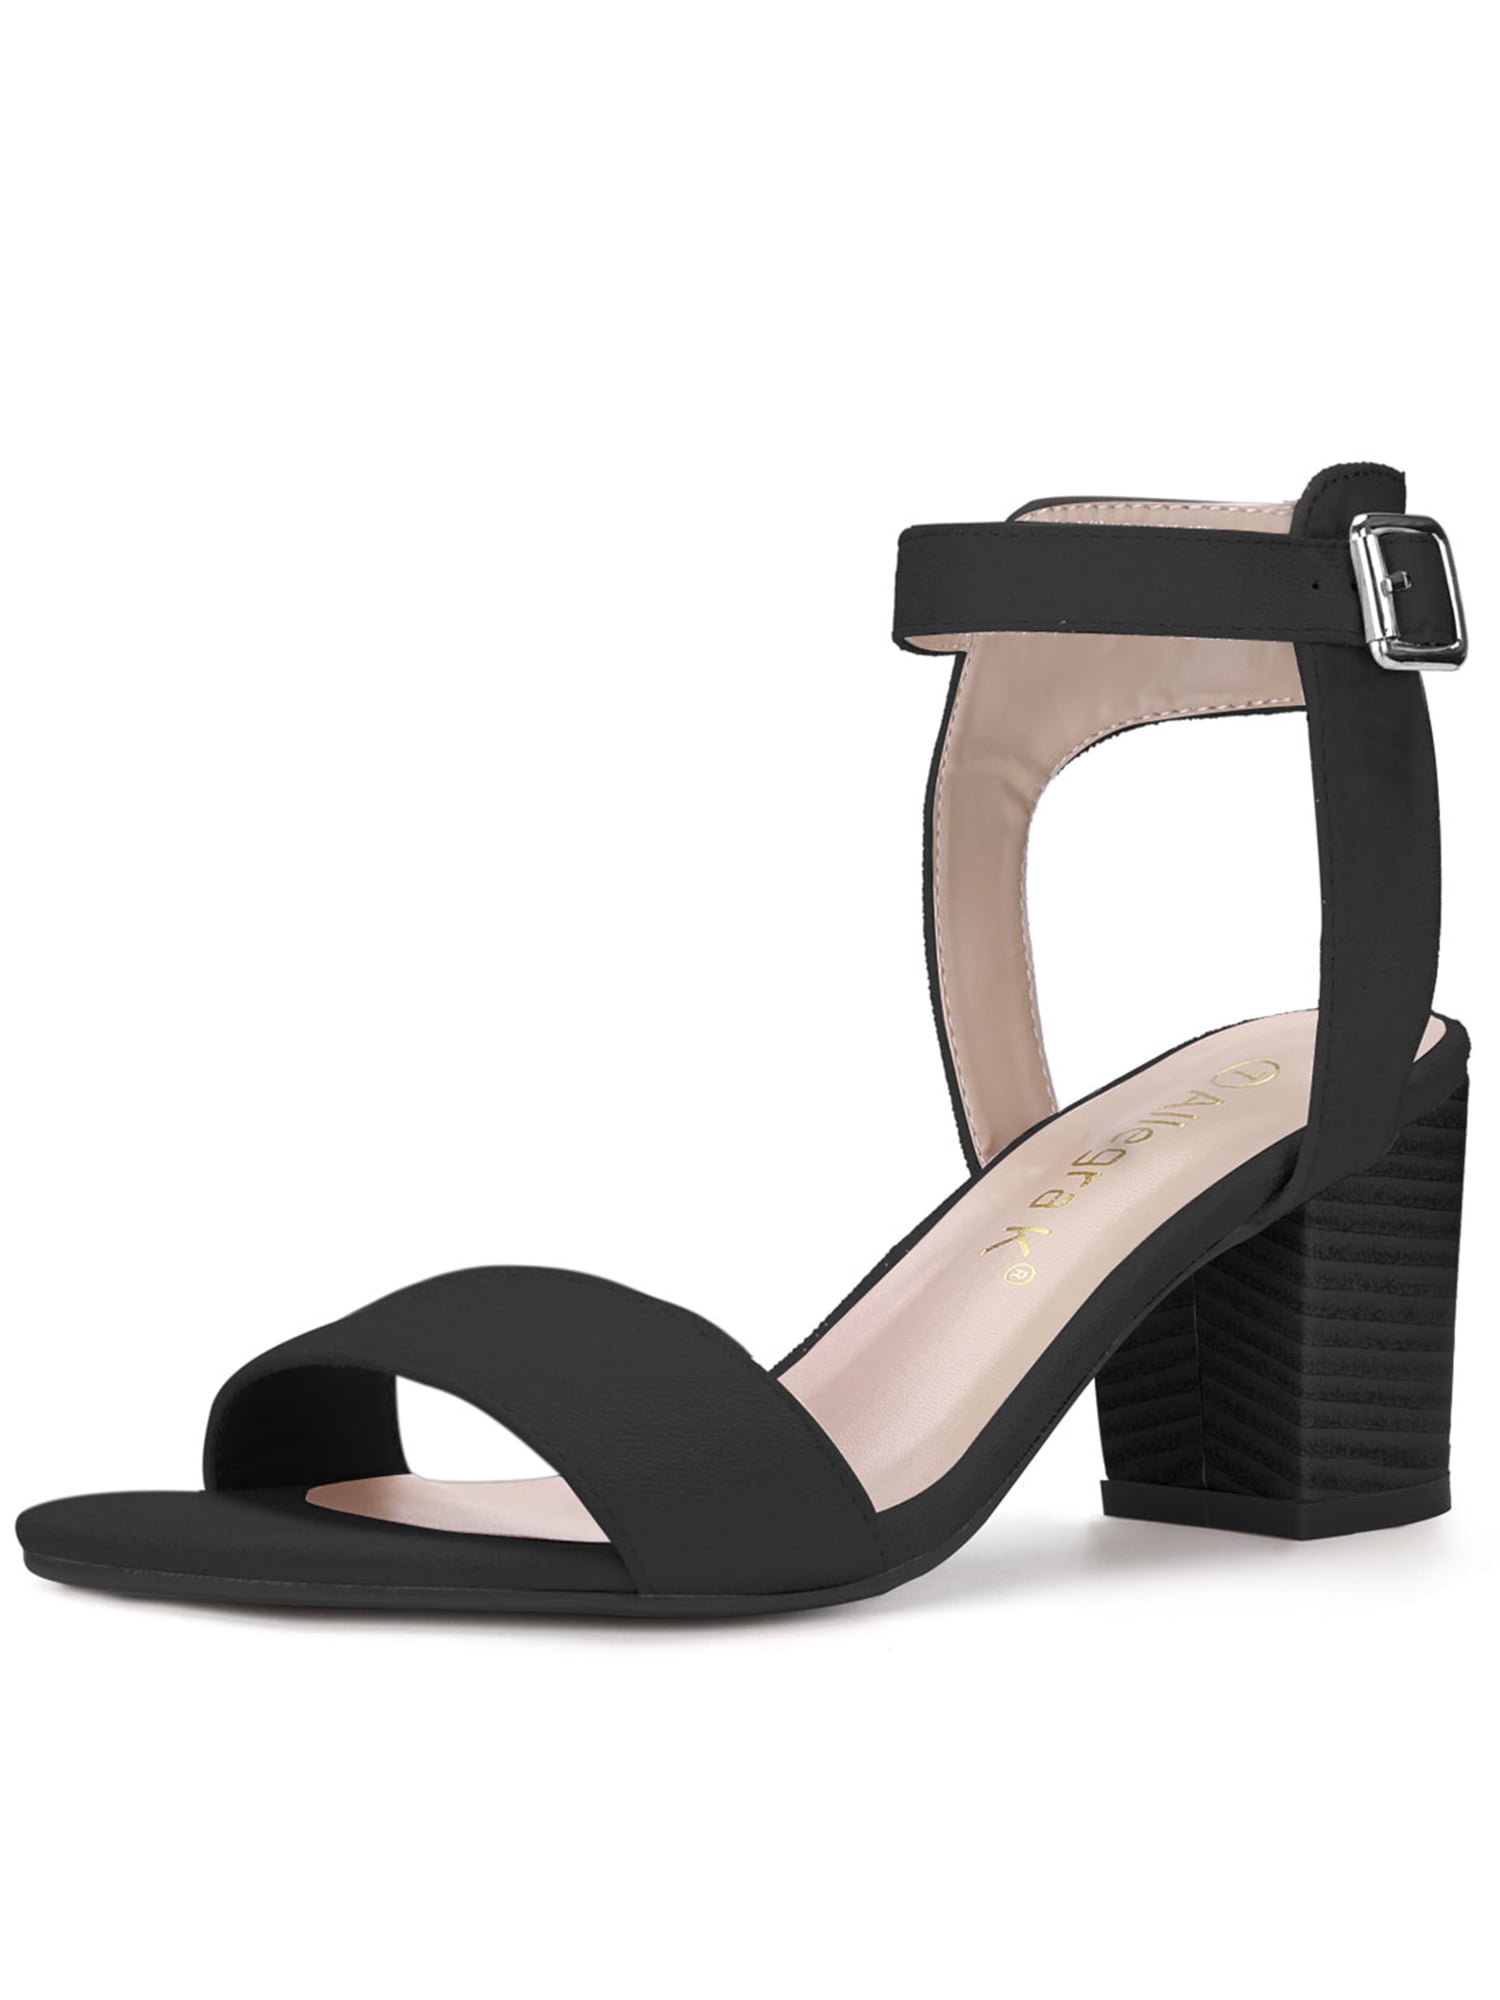 black open toe sandals with ankle strap